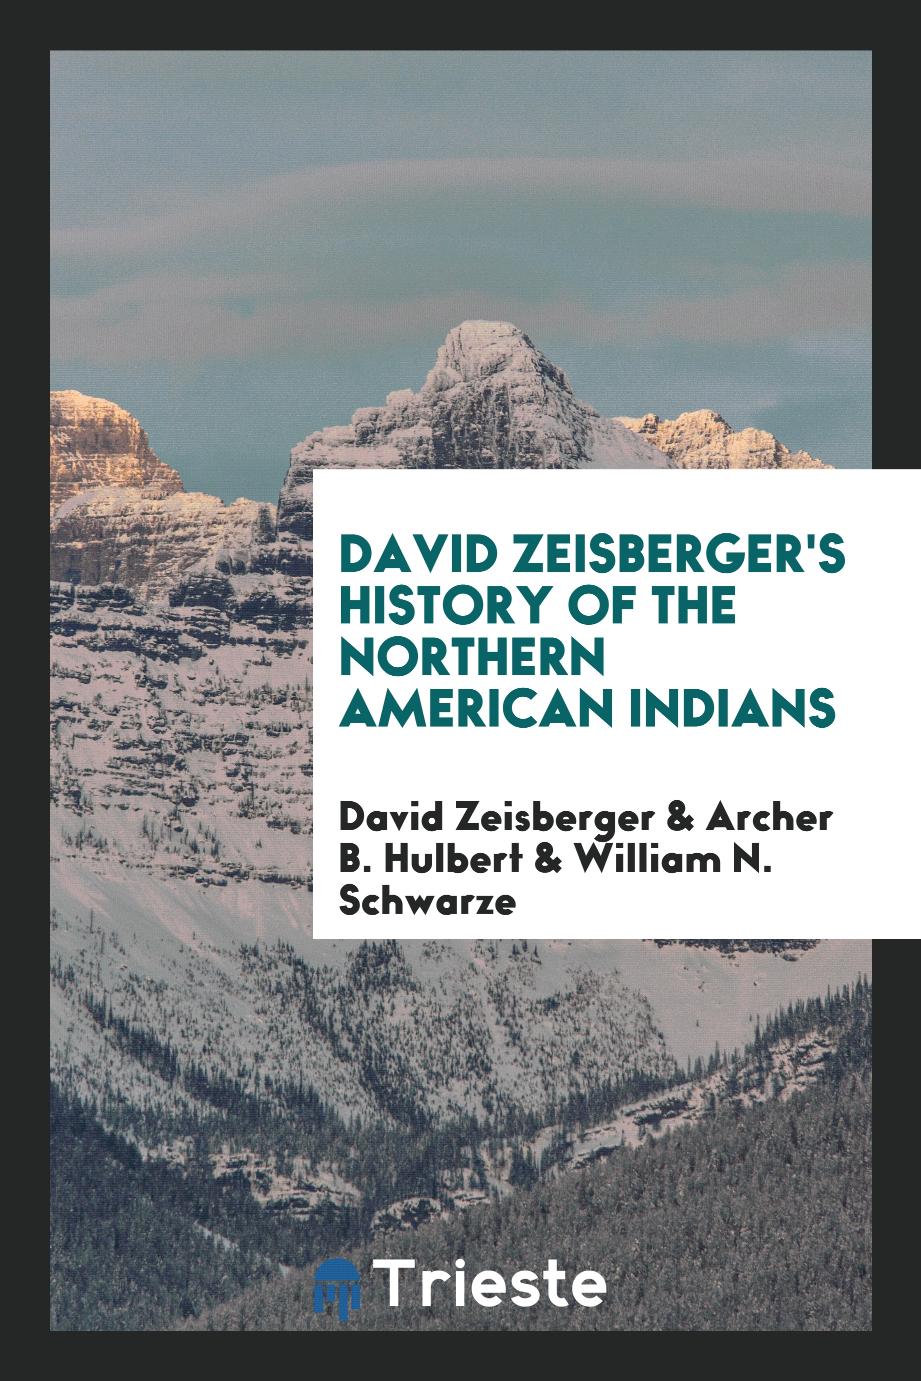 David Zeisberger's History of the Northern American Indians